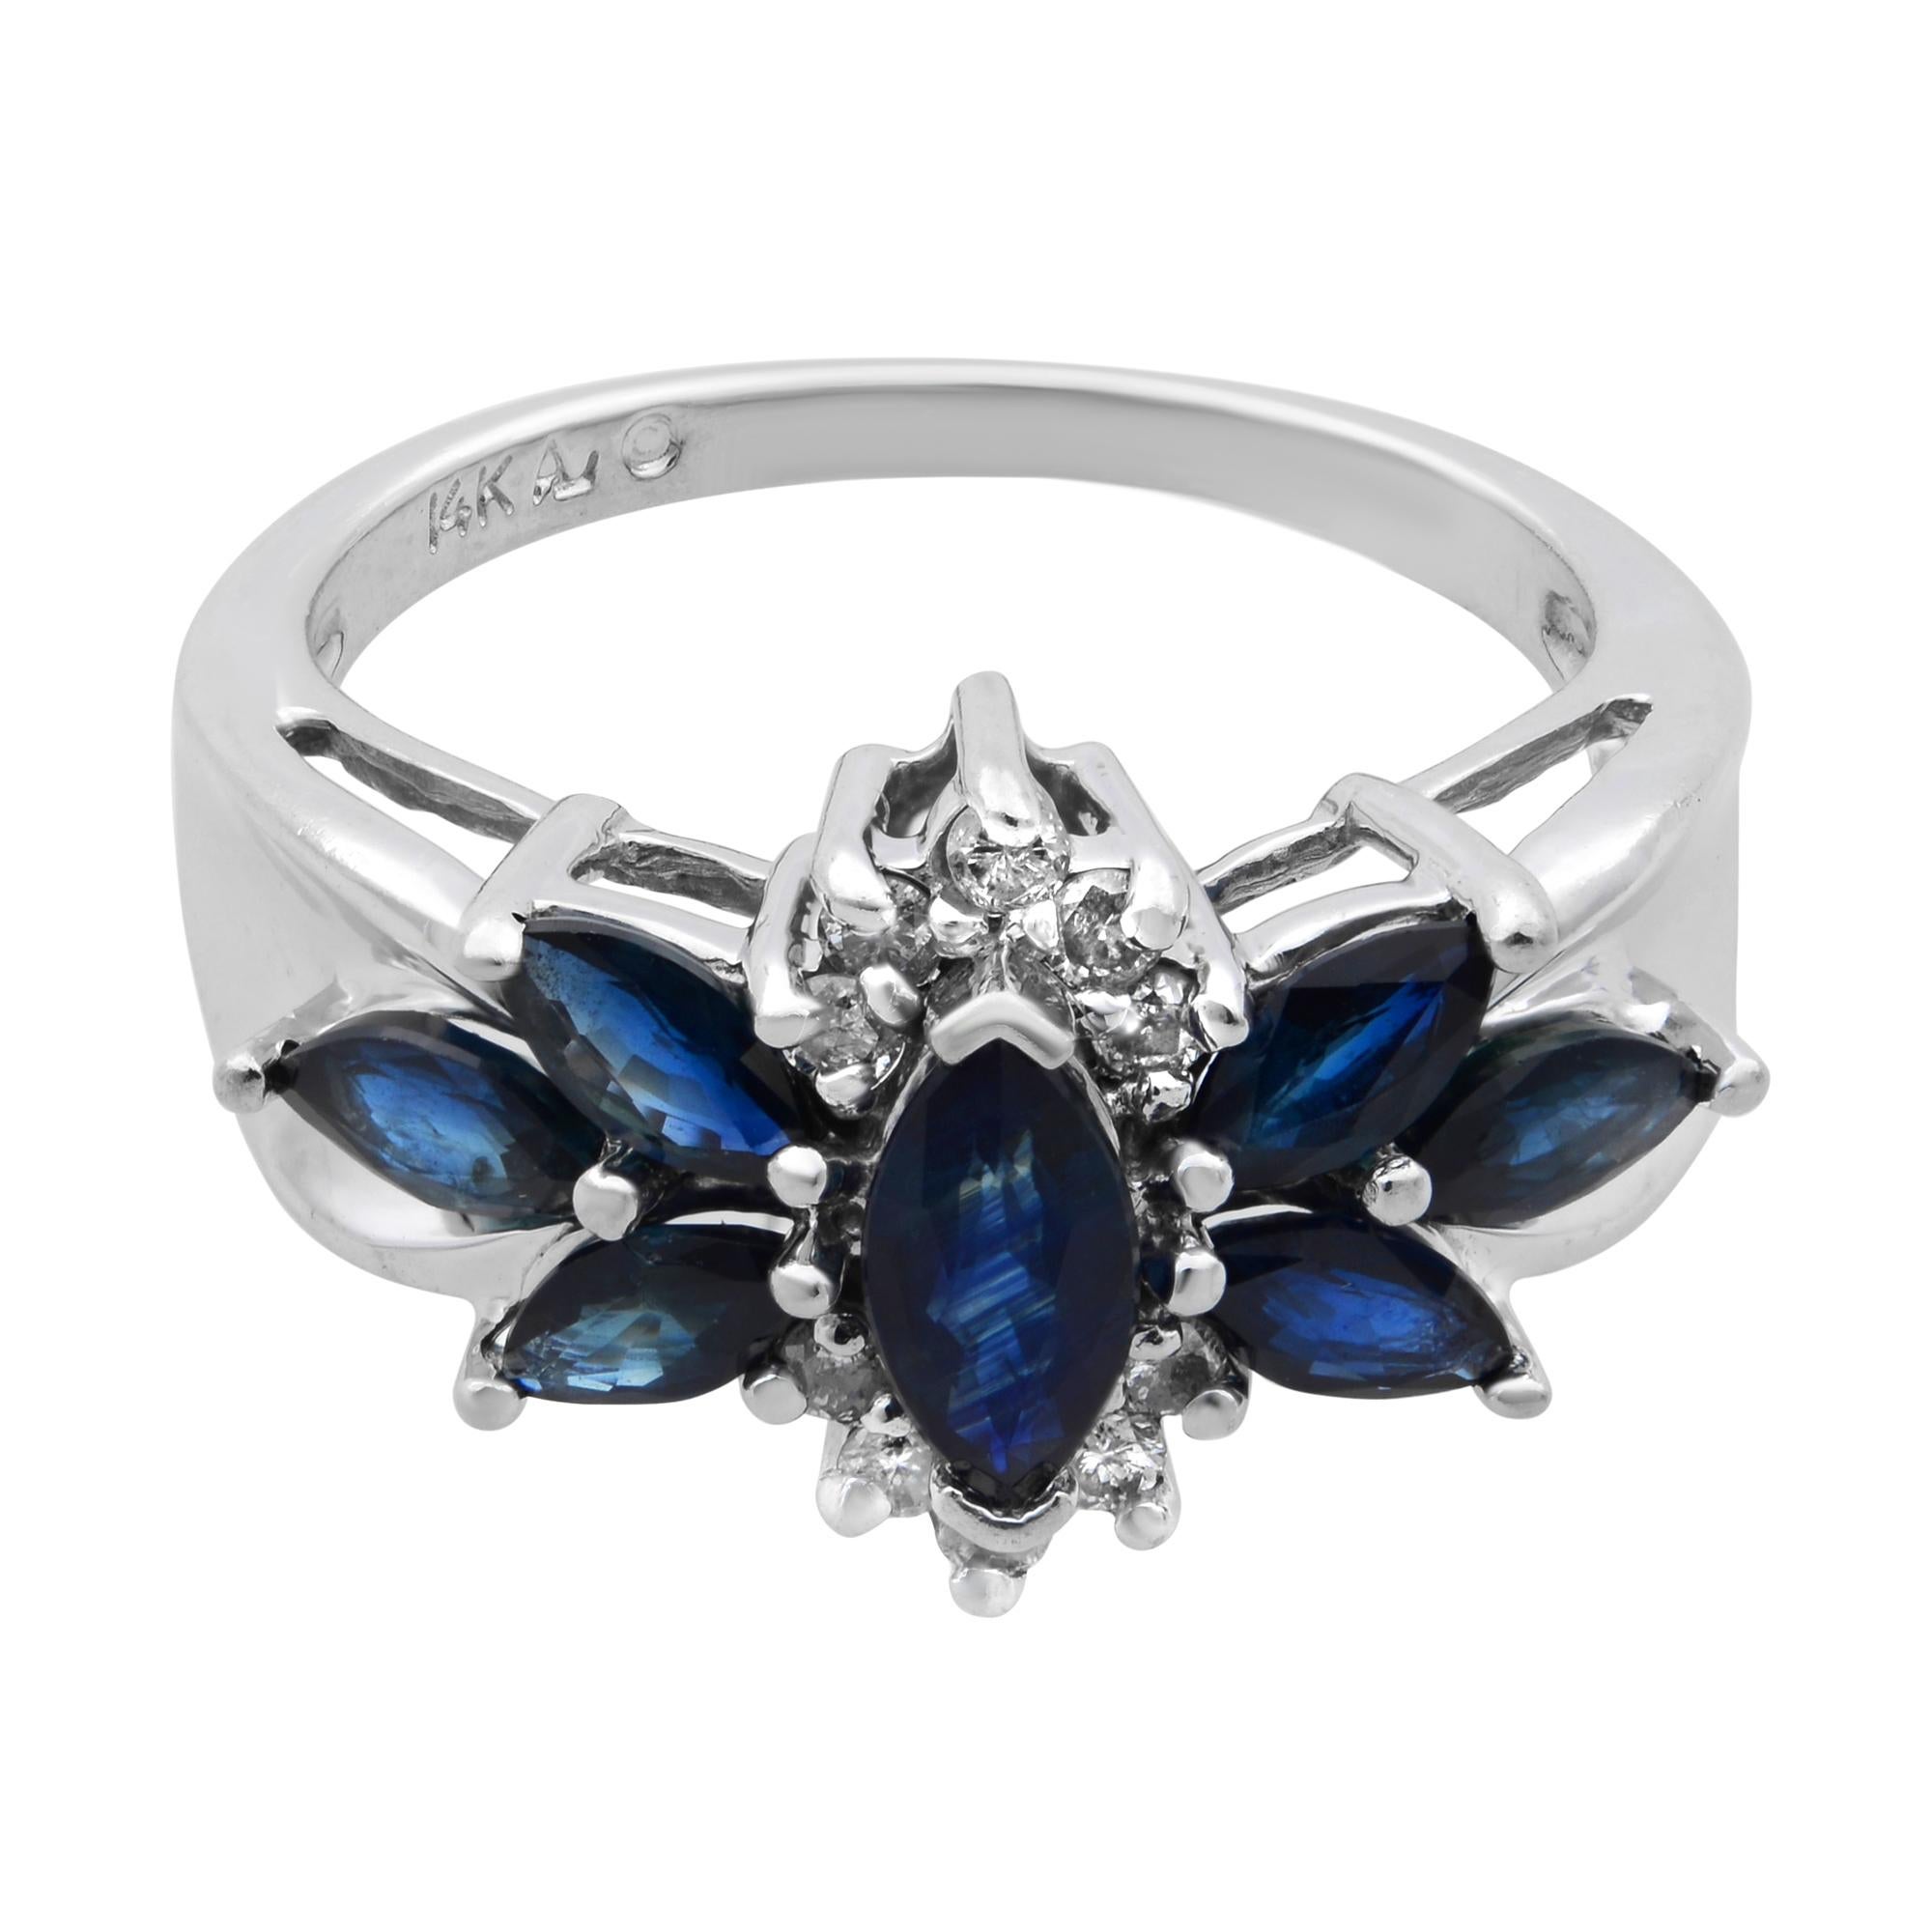 This beautiful ladies cocktail ring is crafted in 14K white gold. It features 7 marquise cut blue sapphires weighing 1.00 carat and flanked with 10 round cut diamonds weighing 0.10 carat. Ring size 7. Total weight: 4.30 grams. Unworn condition.